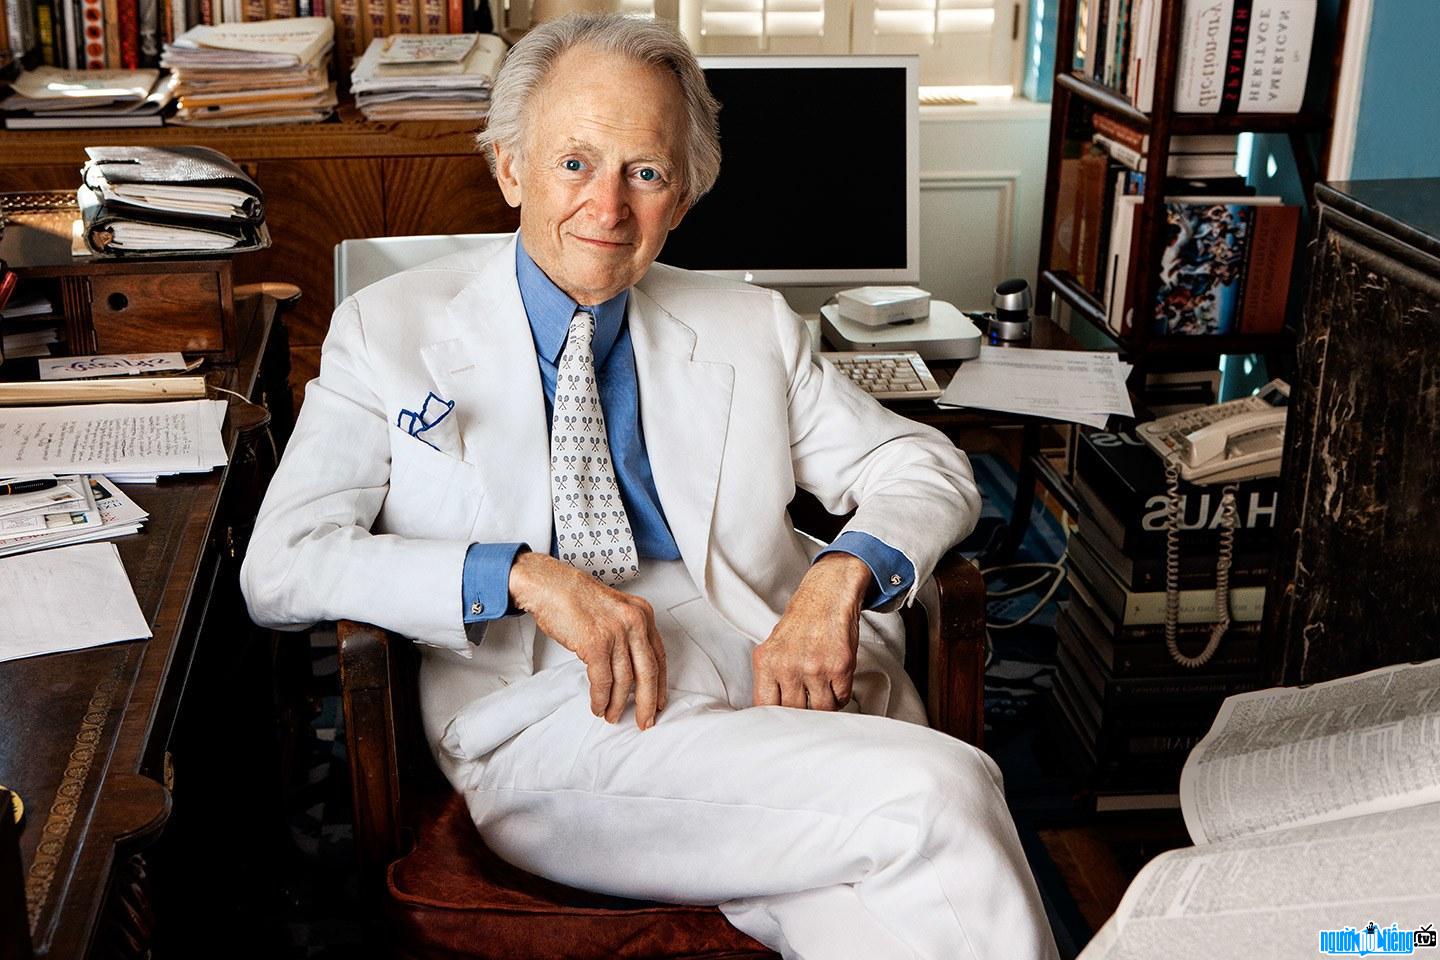 A new image of Journalist Tom Wolfe